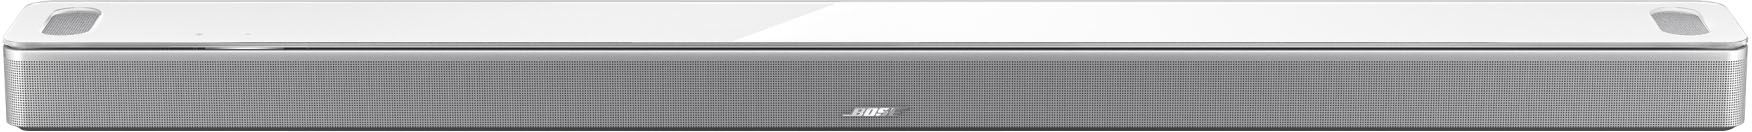 Bose Smart Buy Soundbar with Ultra Dolby Best Assistant 882963-1200 Atmos Arctic and White - Voice